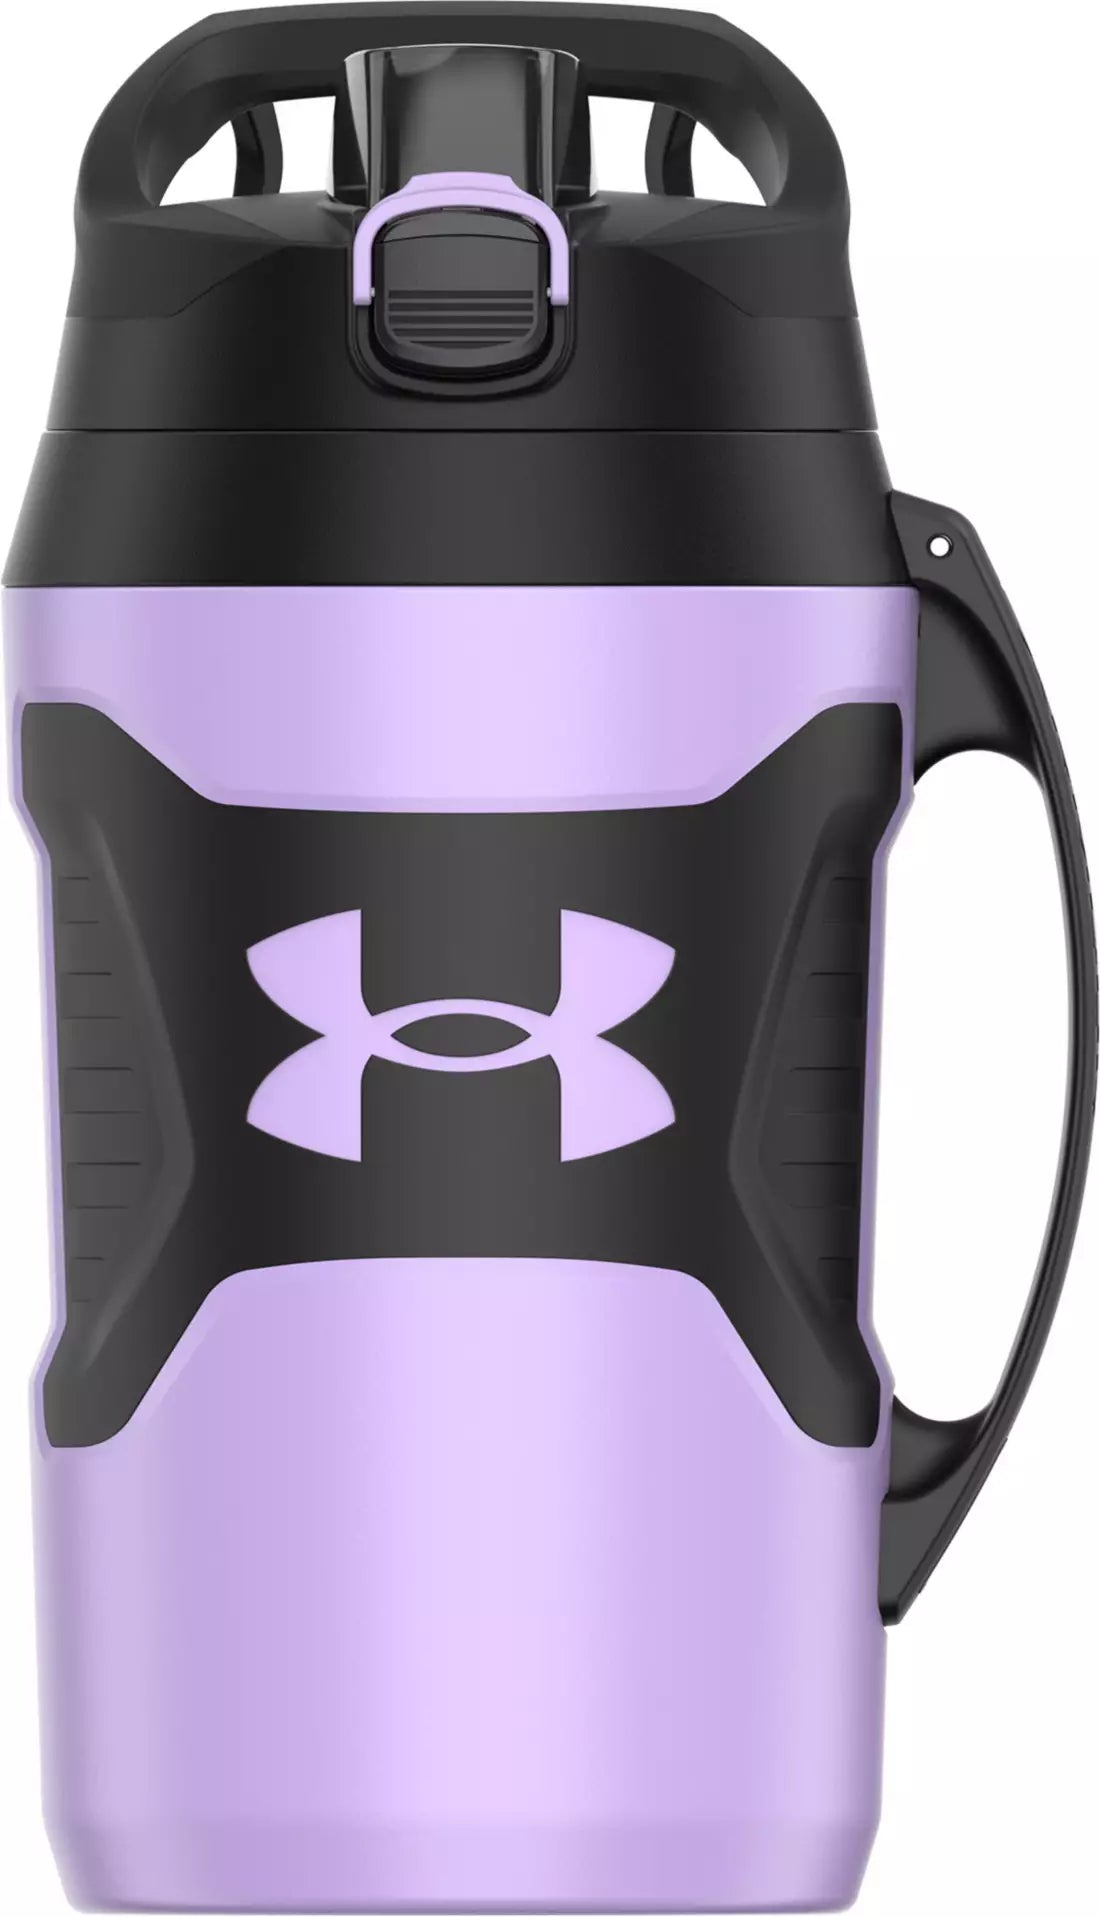 Under Armour Sideline 32 Ounce Squeezable Bottle, Black 